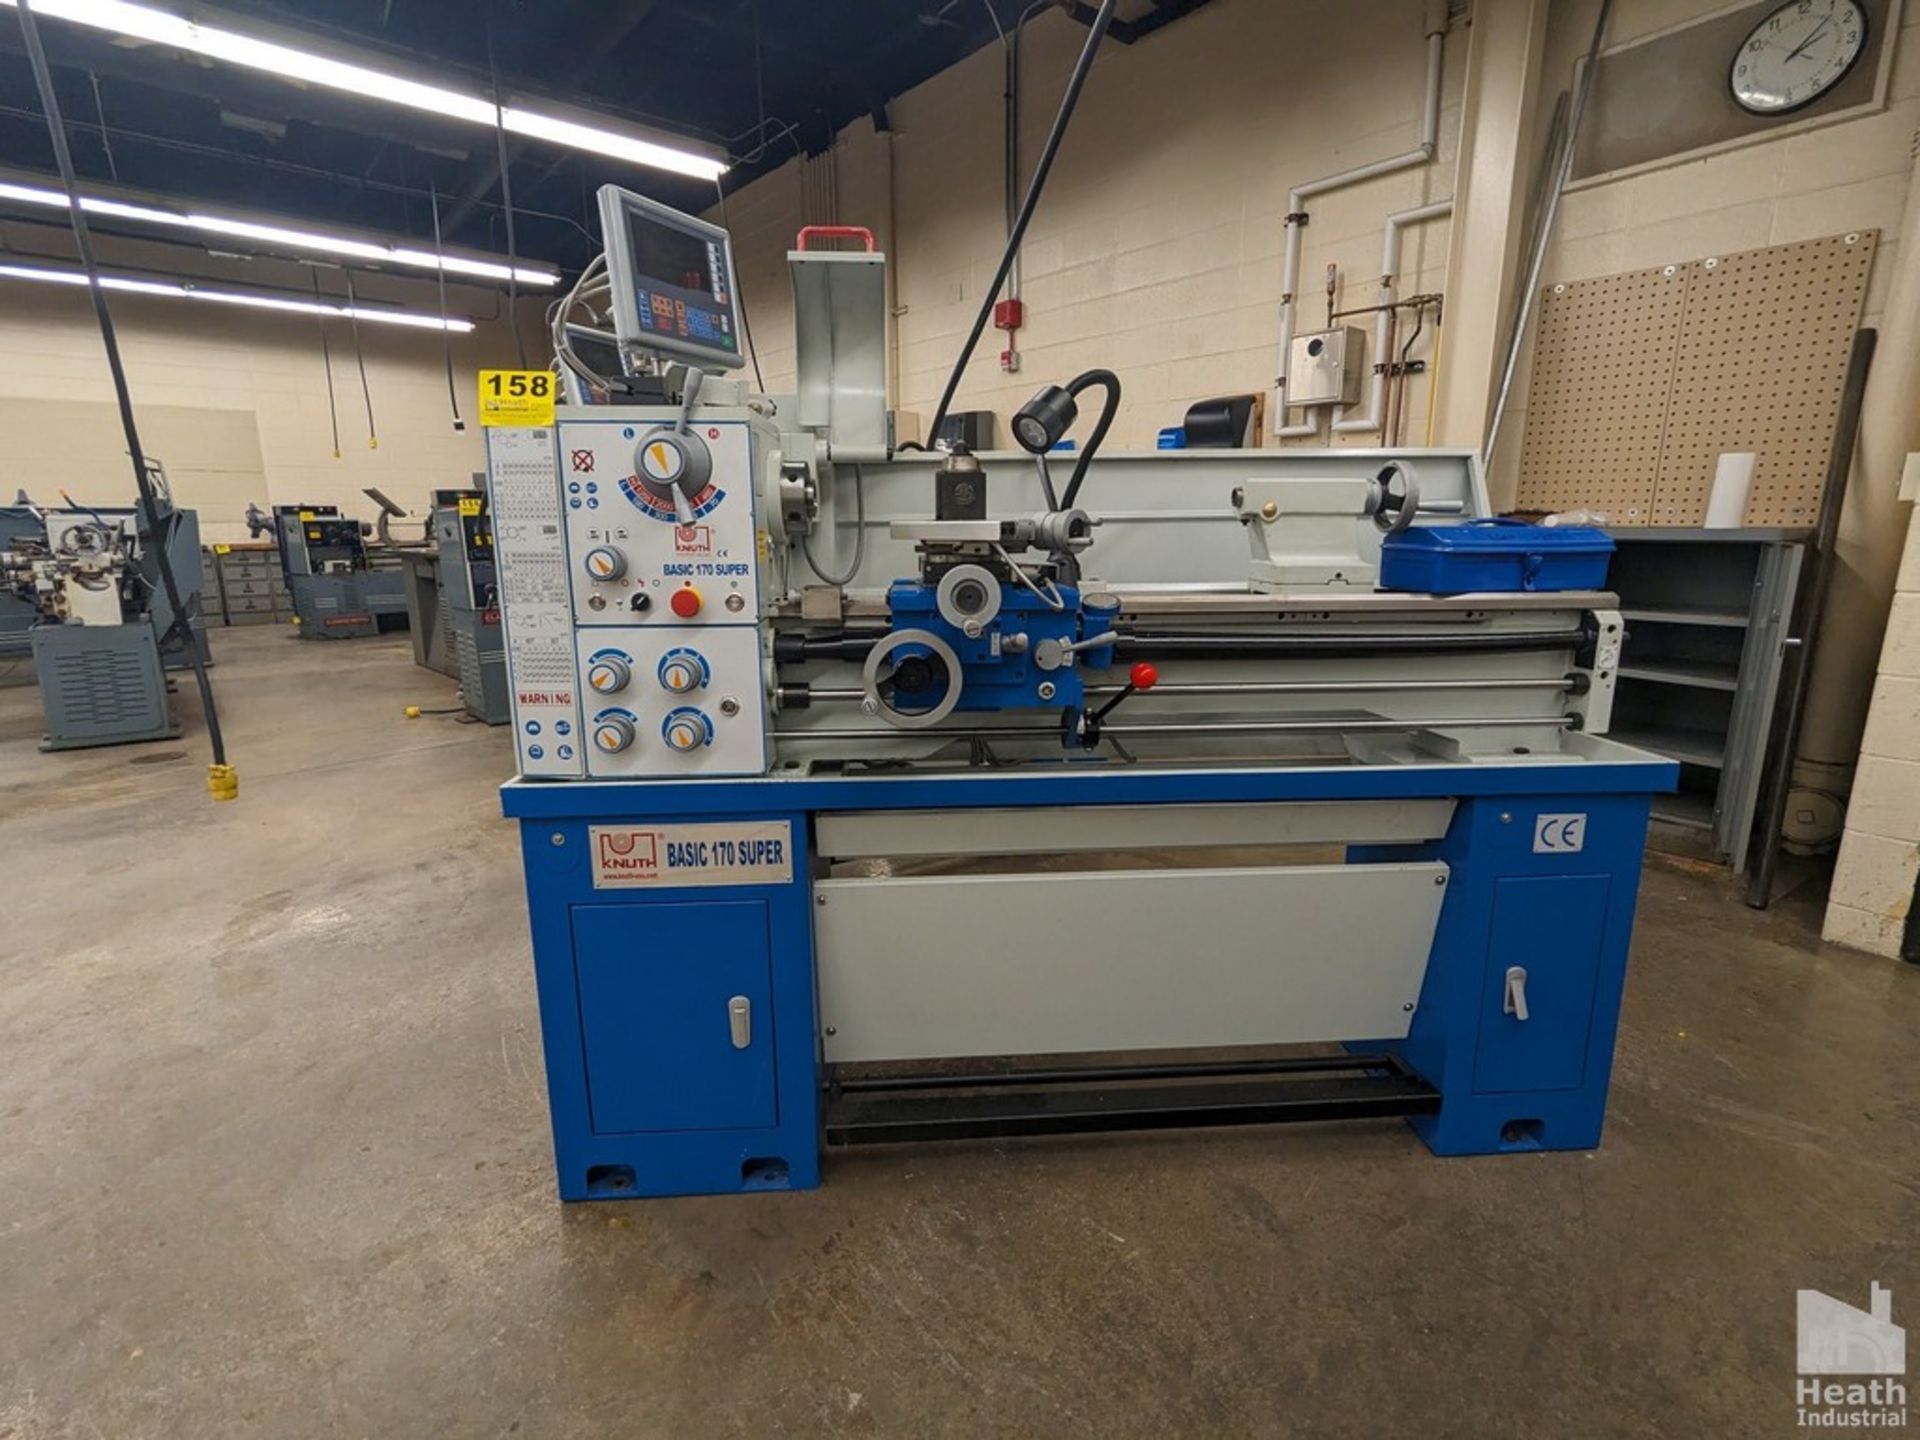 KNUTH 13" X40" MODEL BASIC 170 SUPER TOOLROOM LATHE, S/N 5157 (NEW 2022), 2000 SPINDLE RPM, WITH